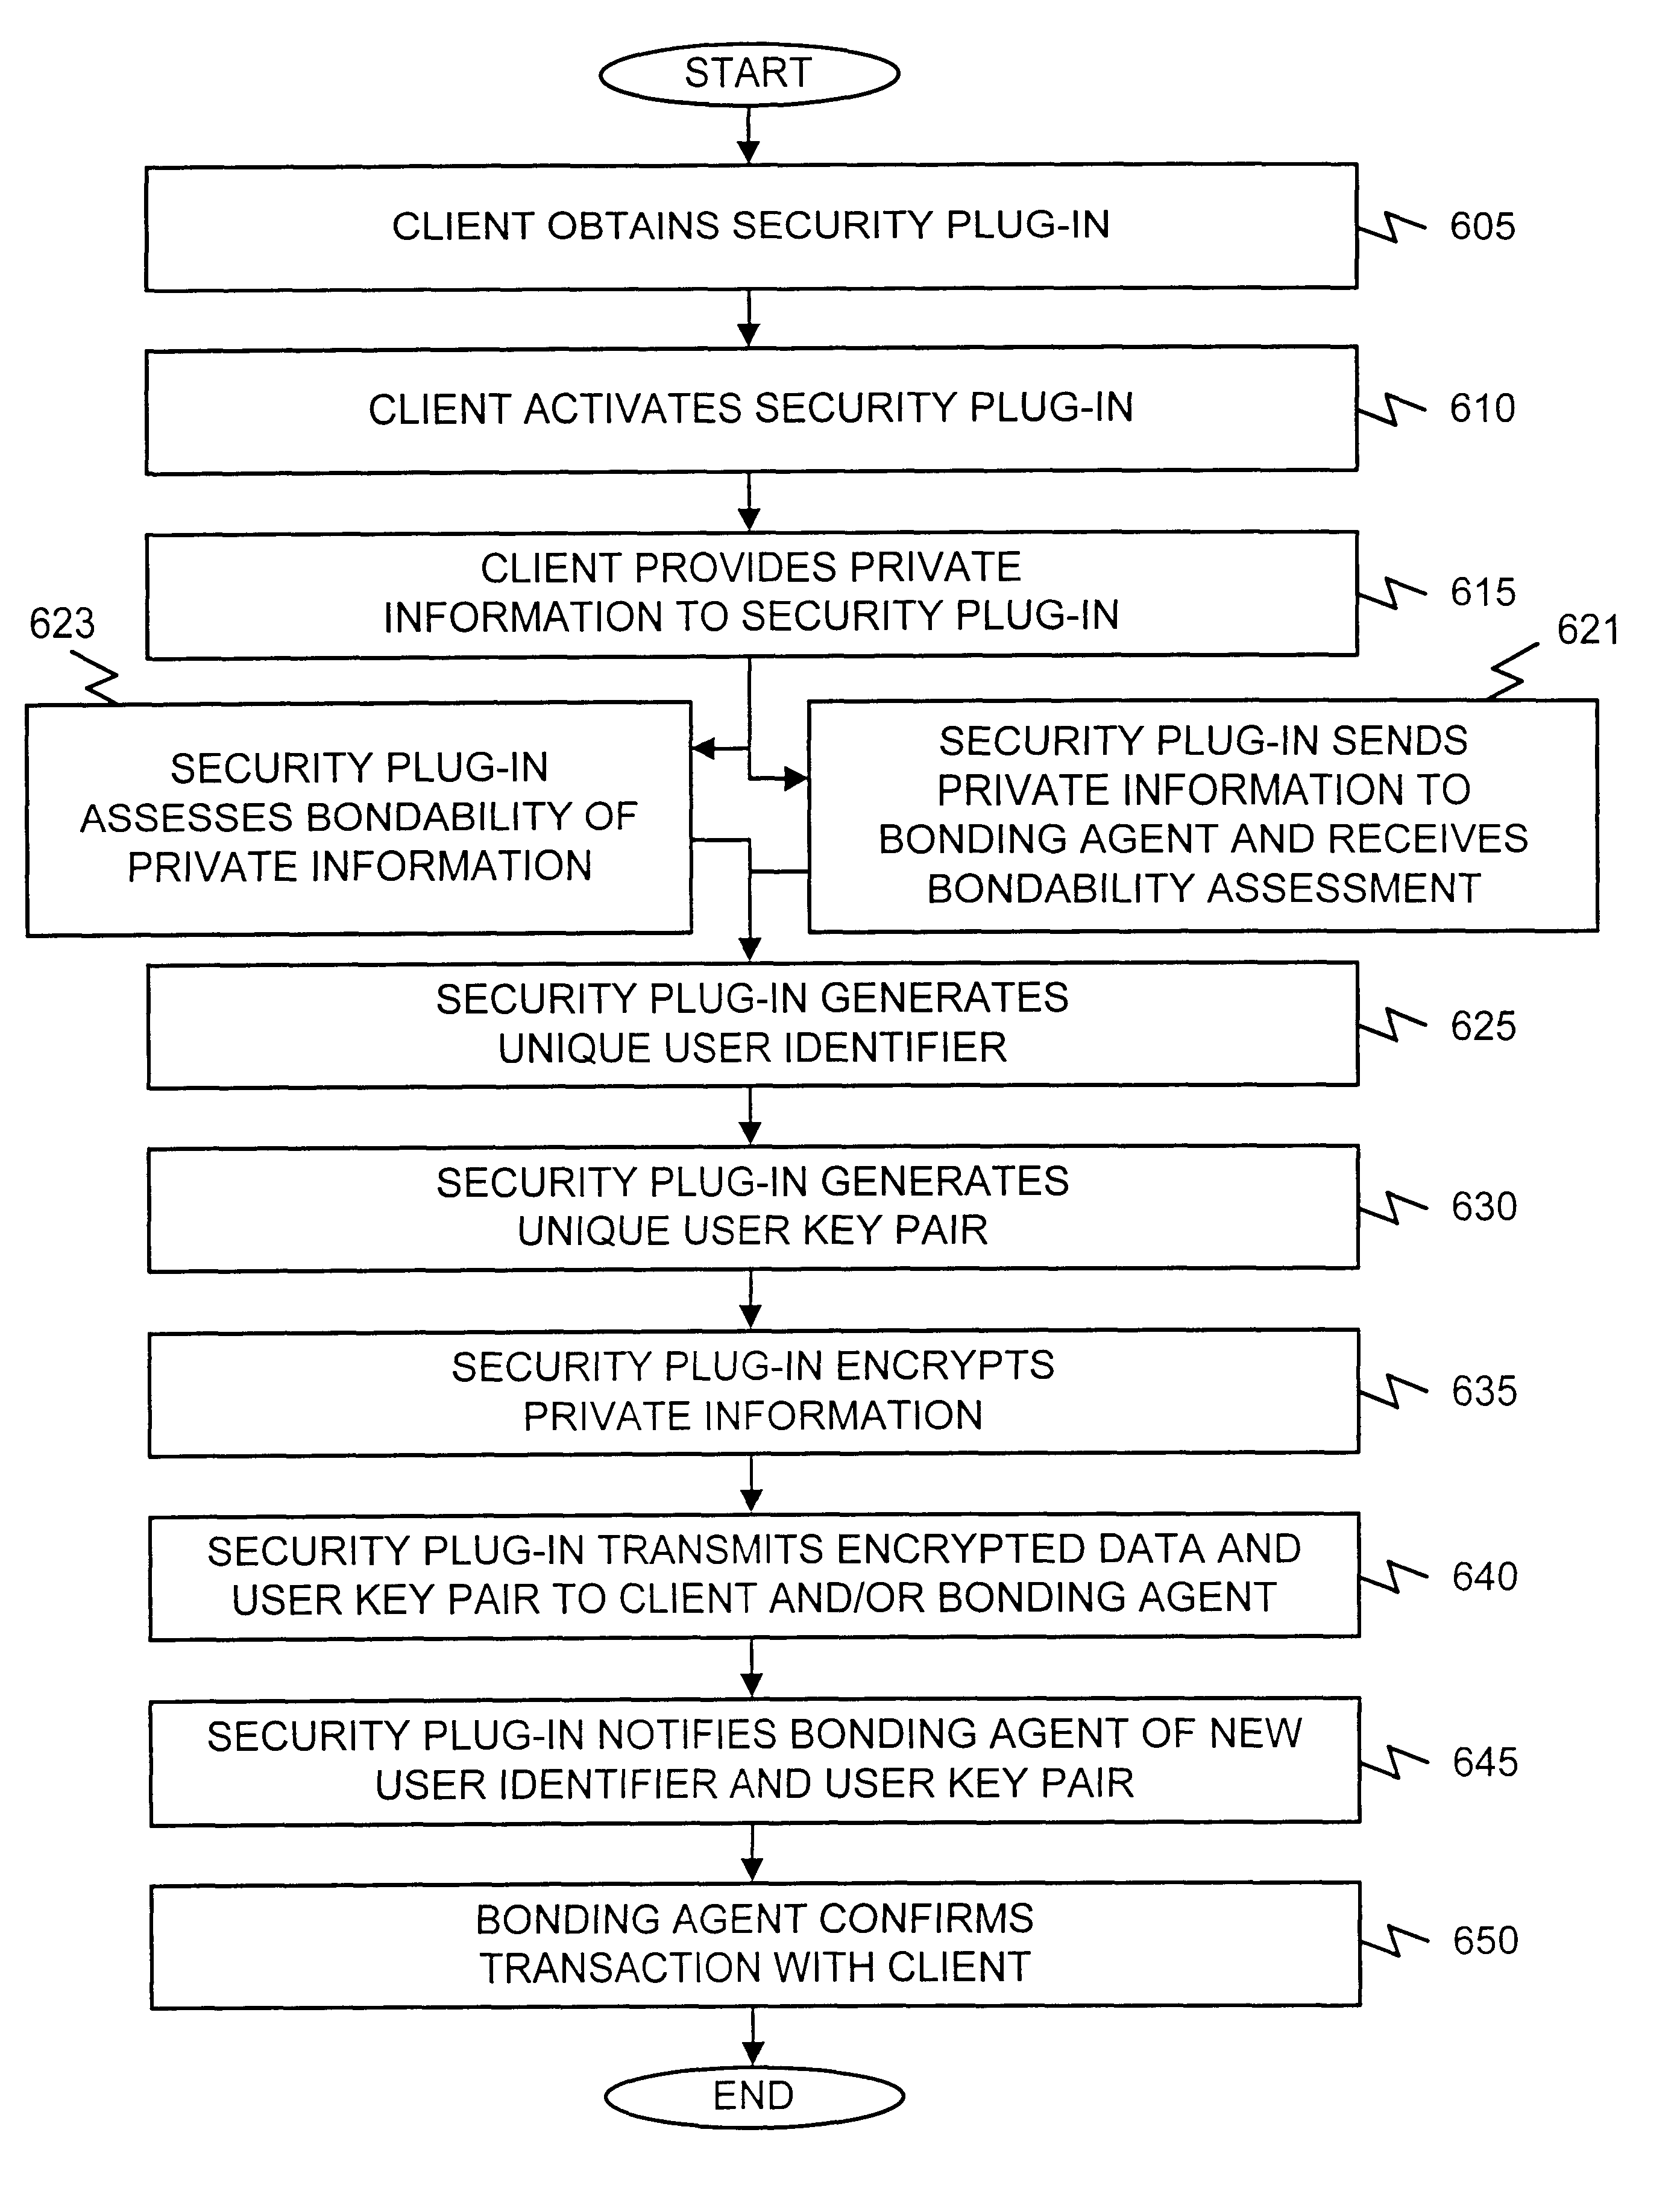 Systems and methods for protecting private information